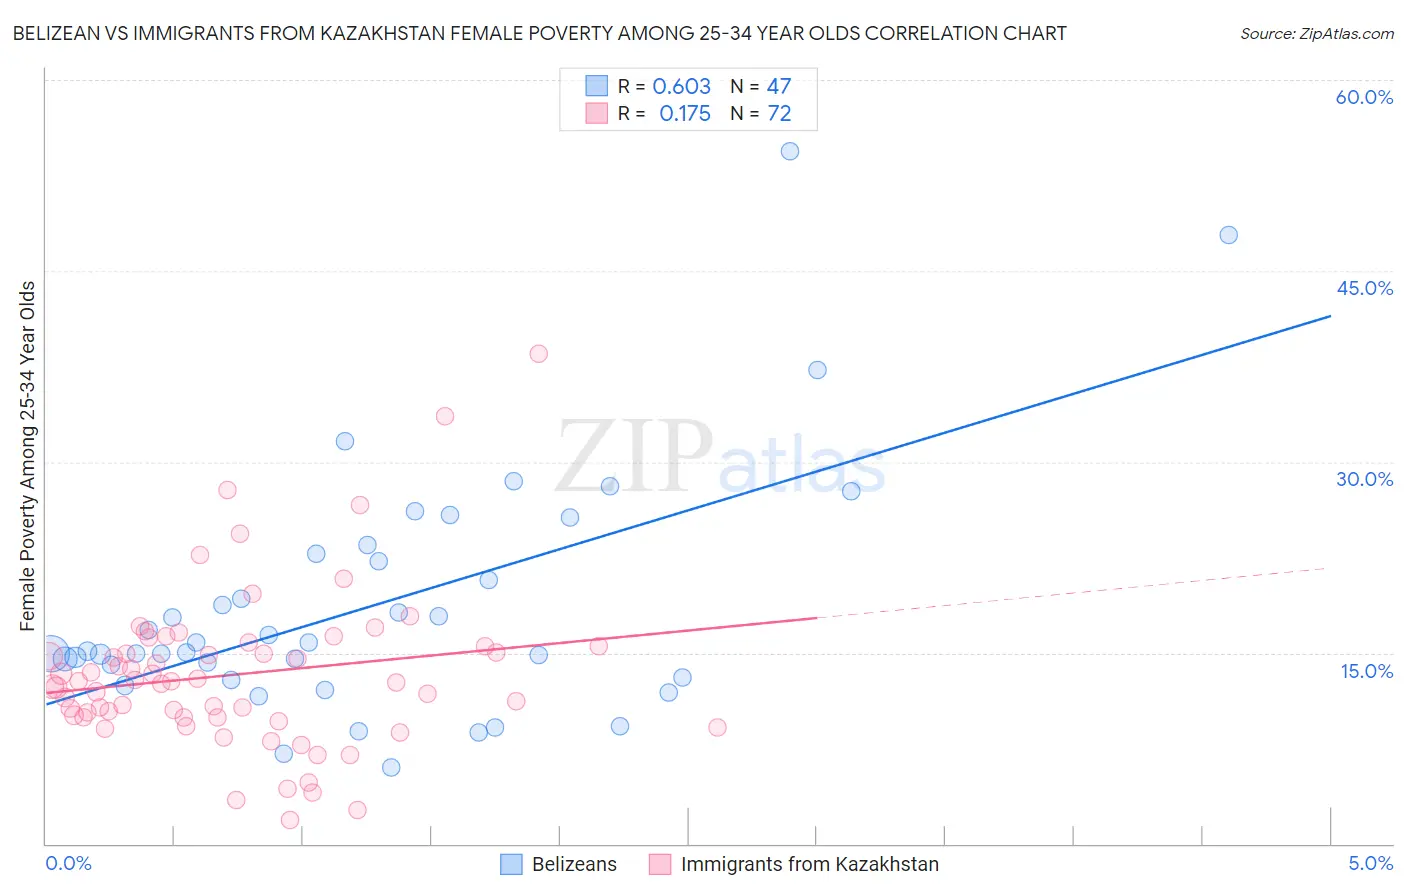 Belizean vs Immigrants from Kazakhstan Female Poverty Among 25-34 Year Olds